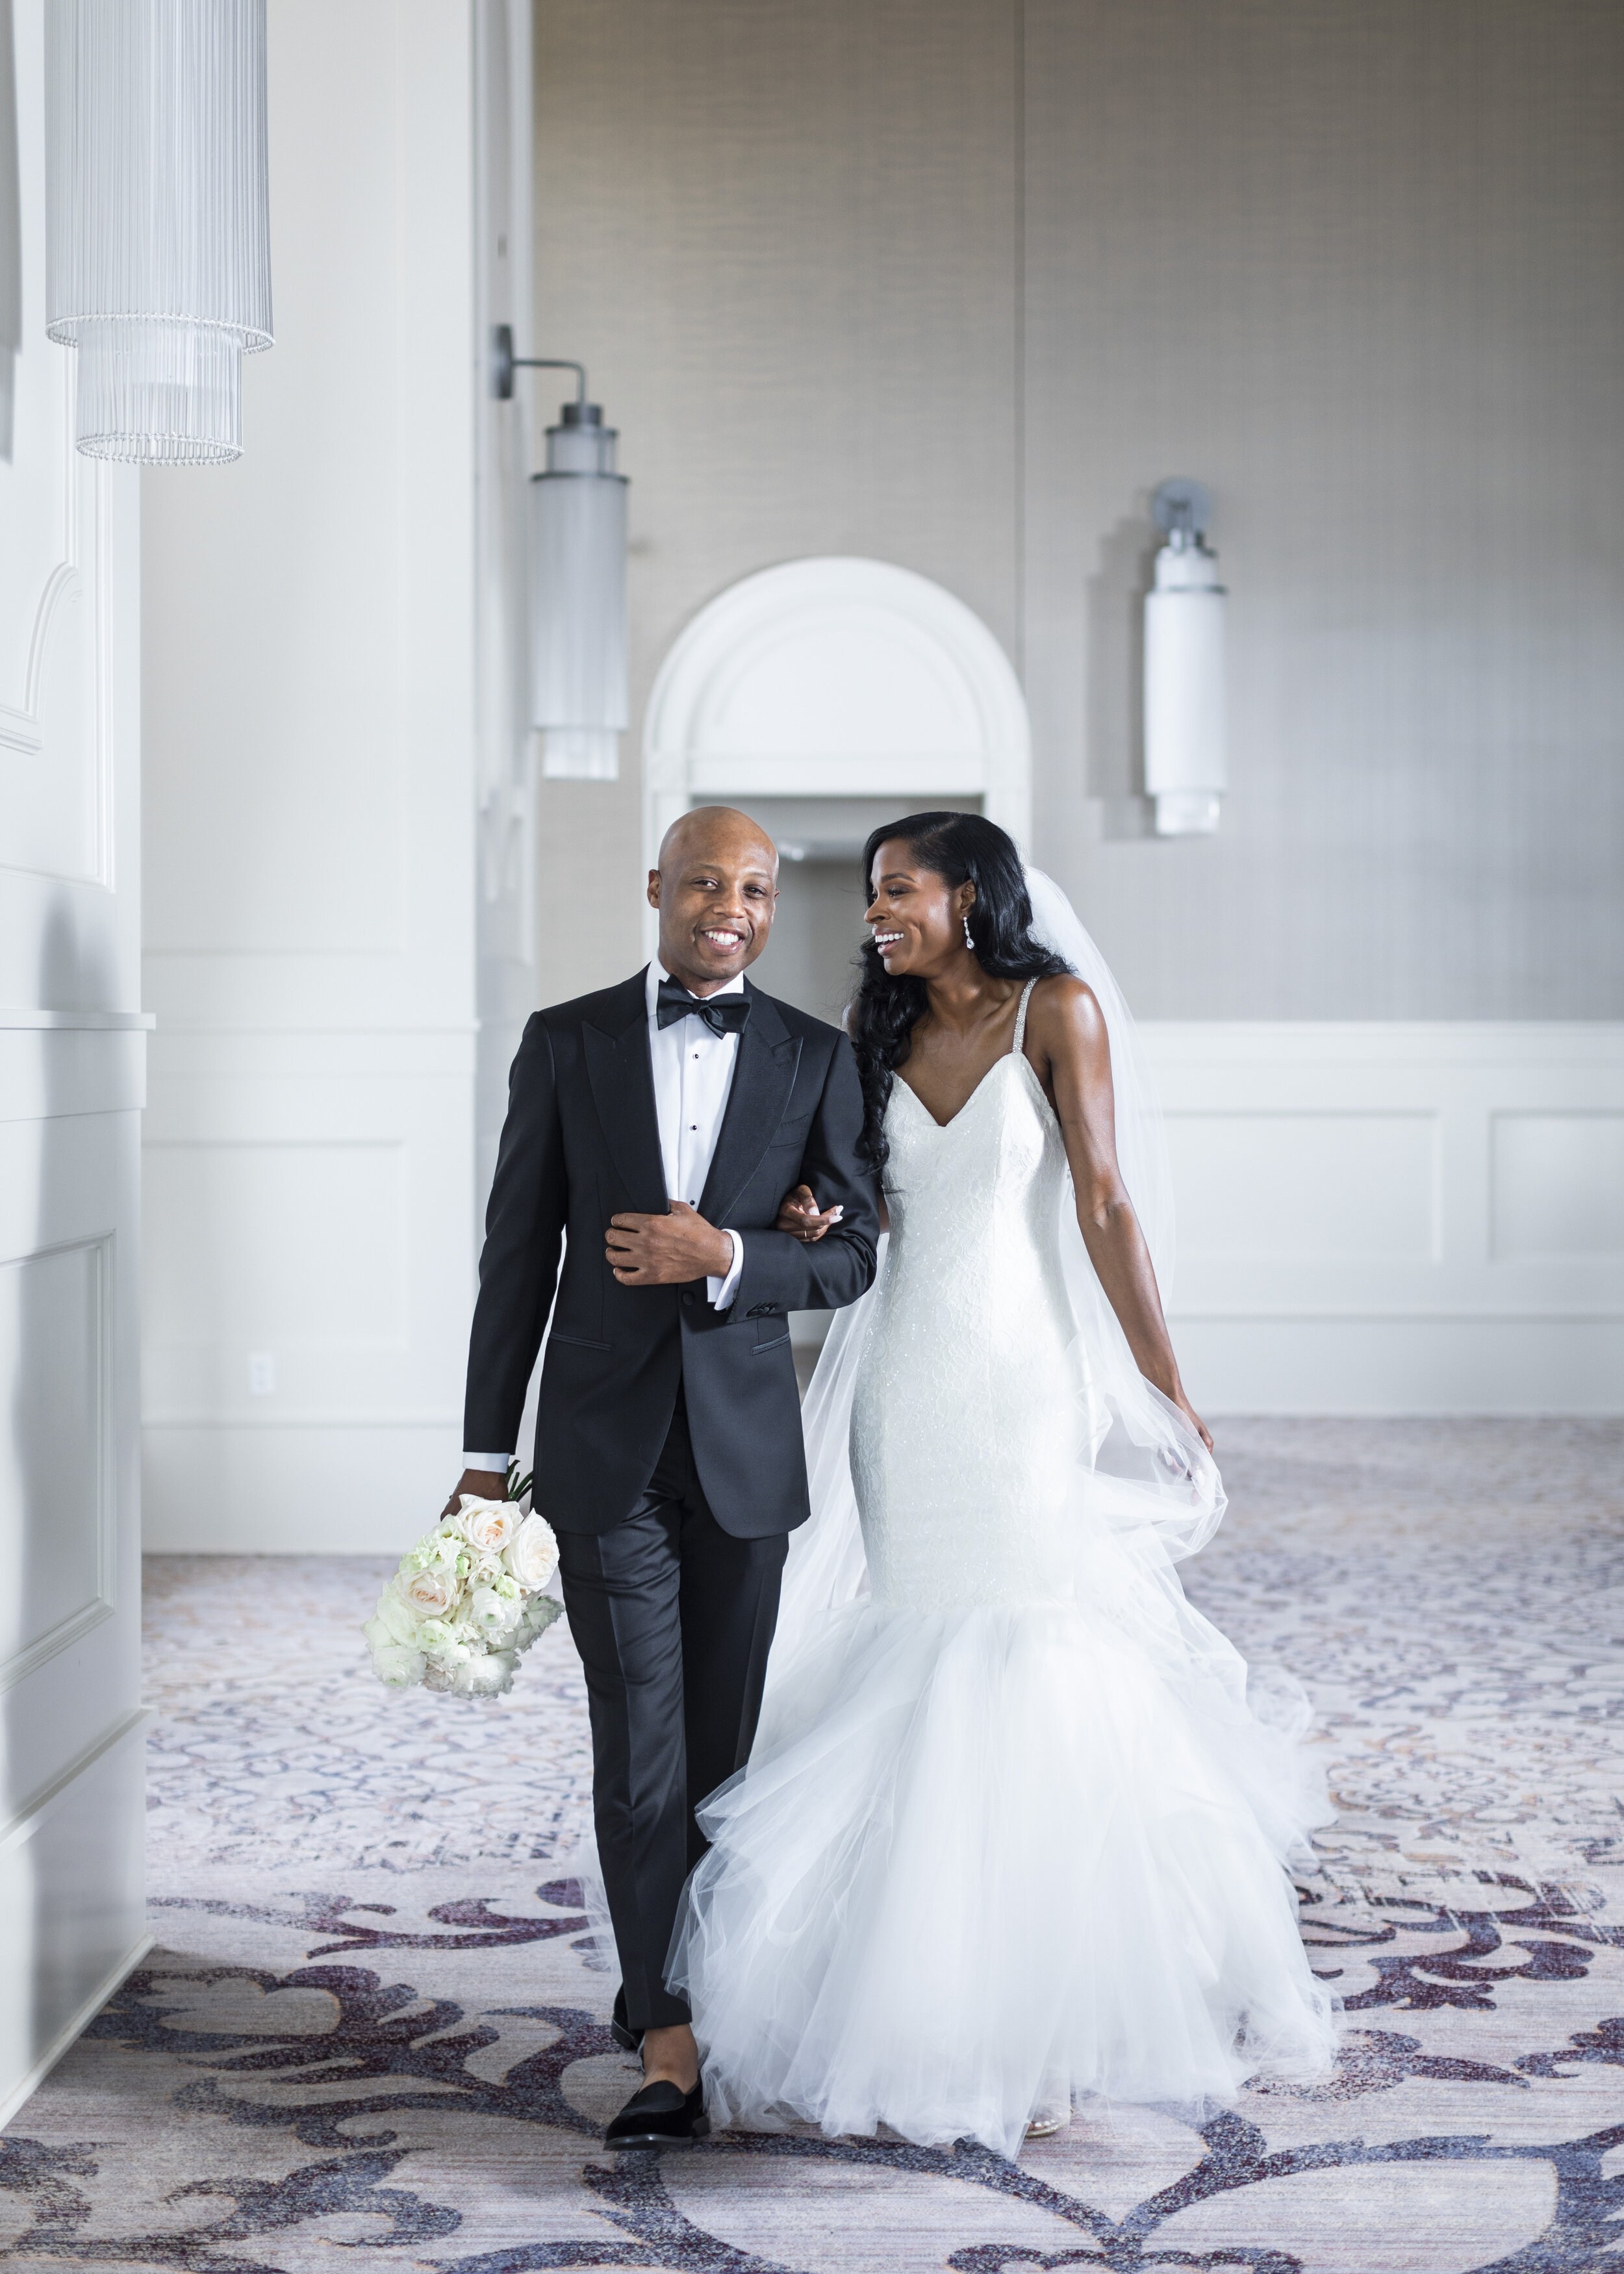  An adoring bride looks at her handsome husband at the gorgeous Hotel Vin near Dallas, TX. poses for couples wedding venues in dallas texas bride and groom outfit inspiration mermaid dress texas summer wedding ideas indoor venue ideas savanna richard